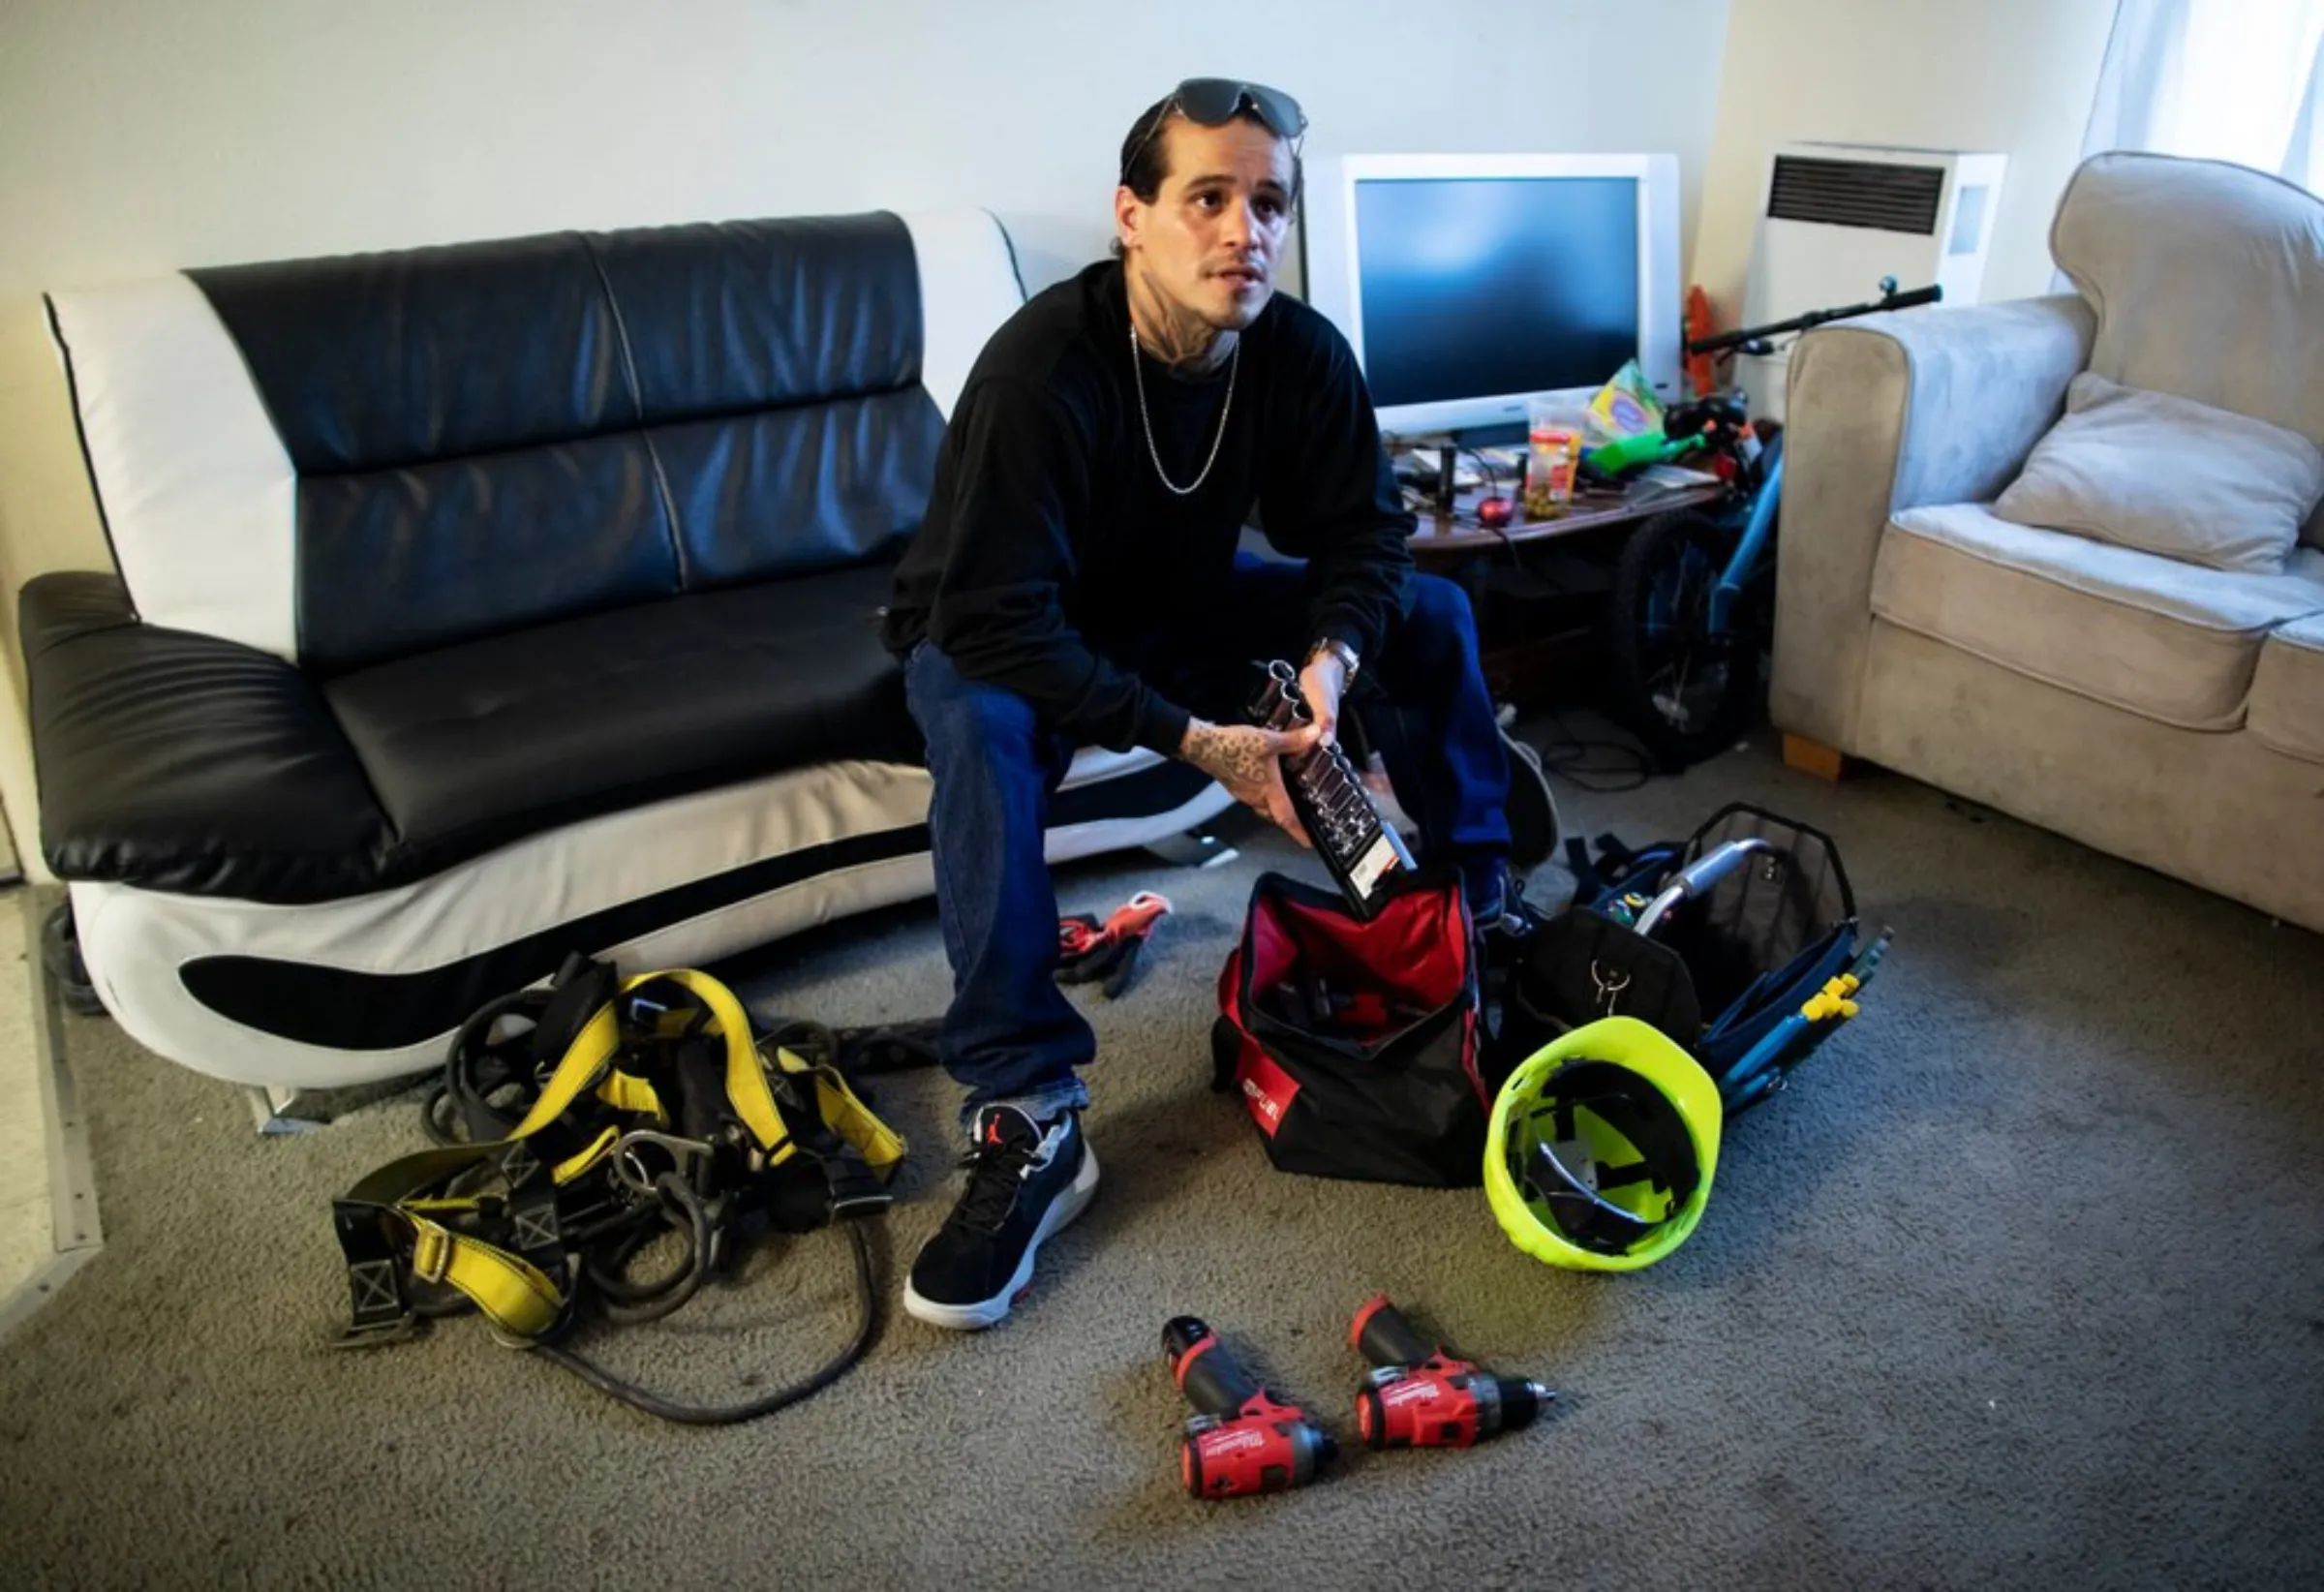 Ex-gang member Ramon Ramos displays the tools he uses to install solar panel systems at his mother’s apartment in North Hollywood, California, May 20, 2021